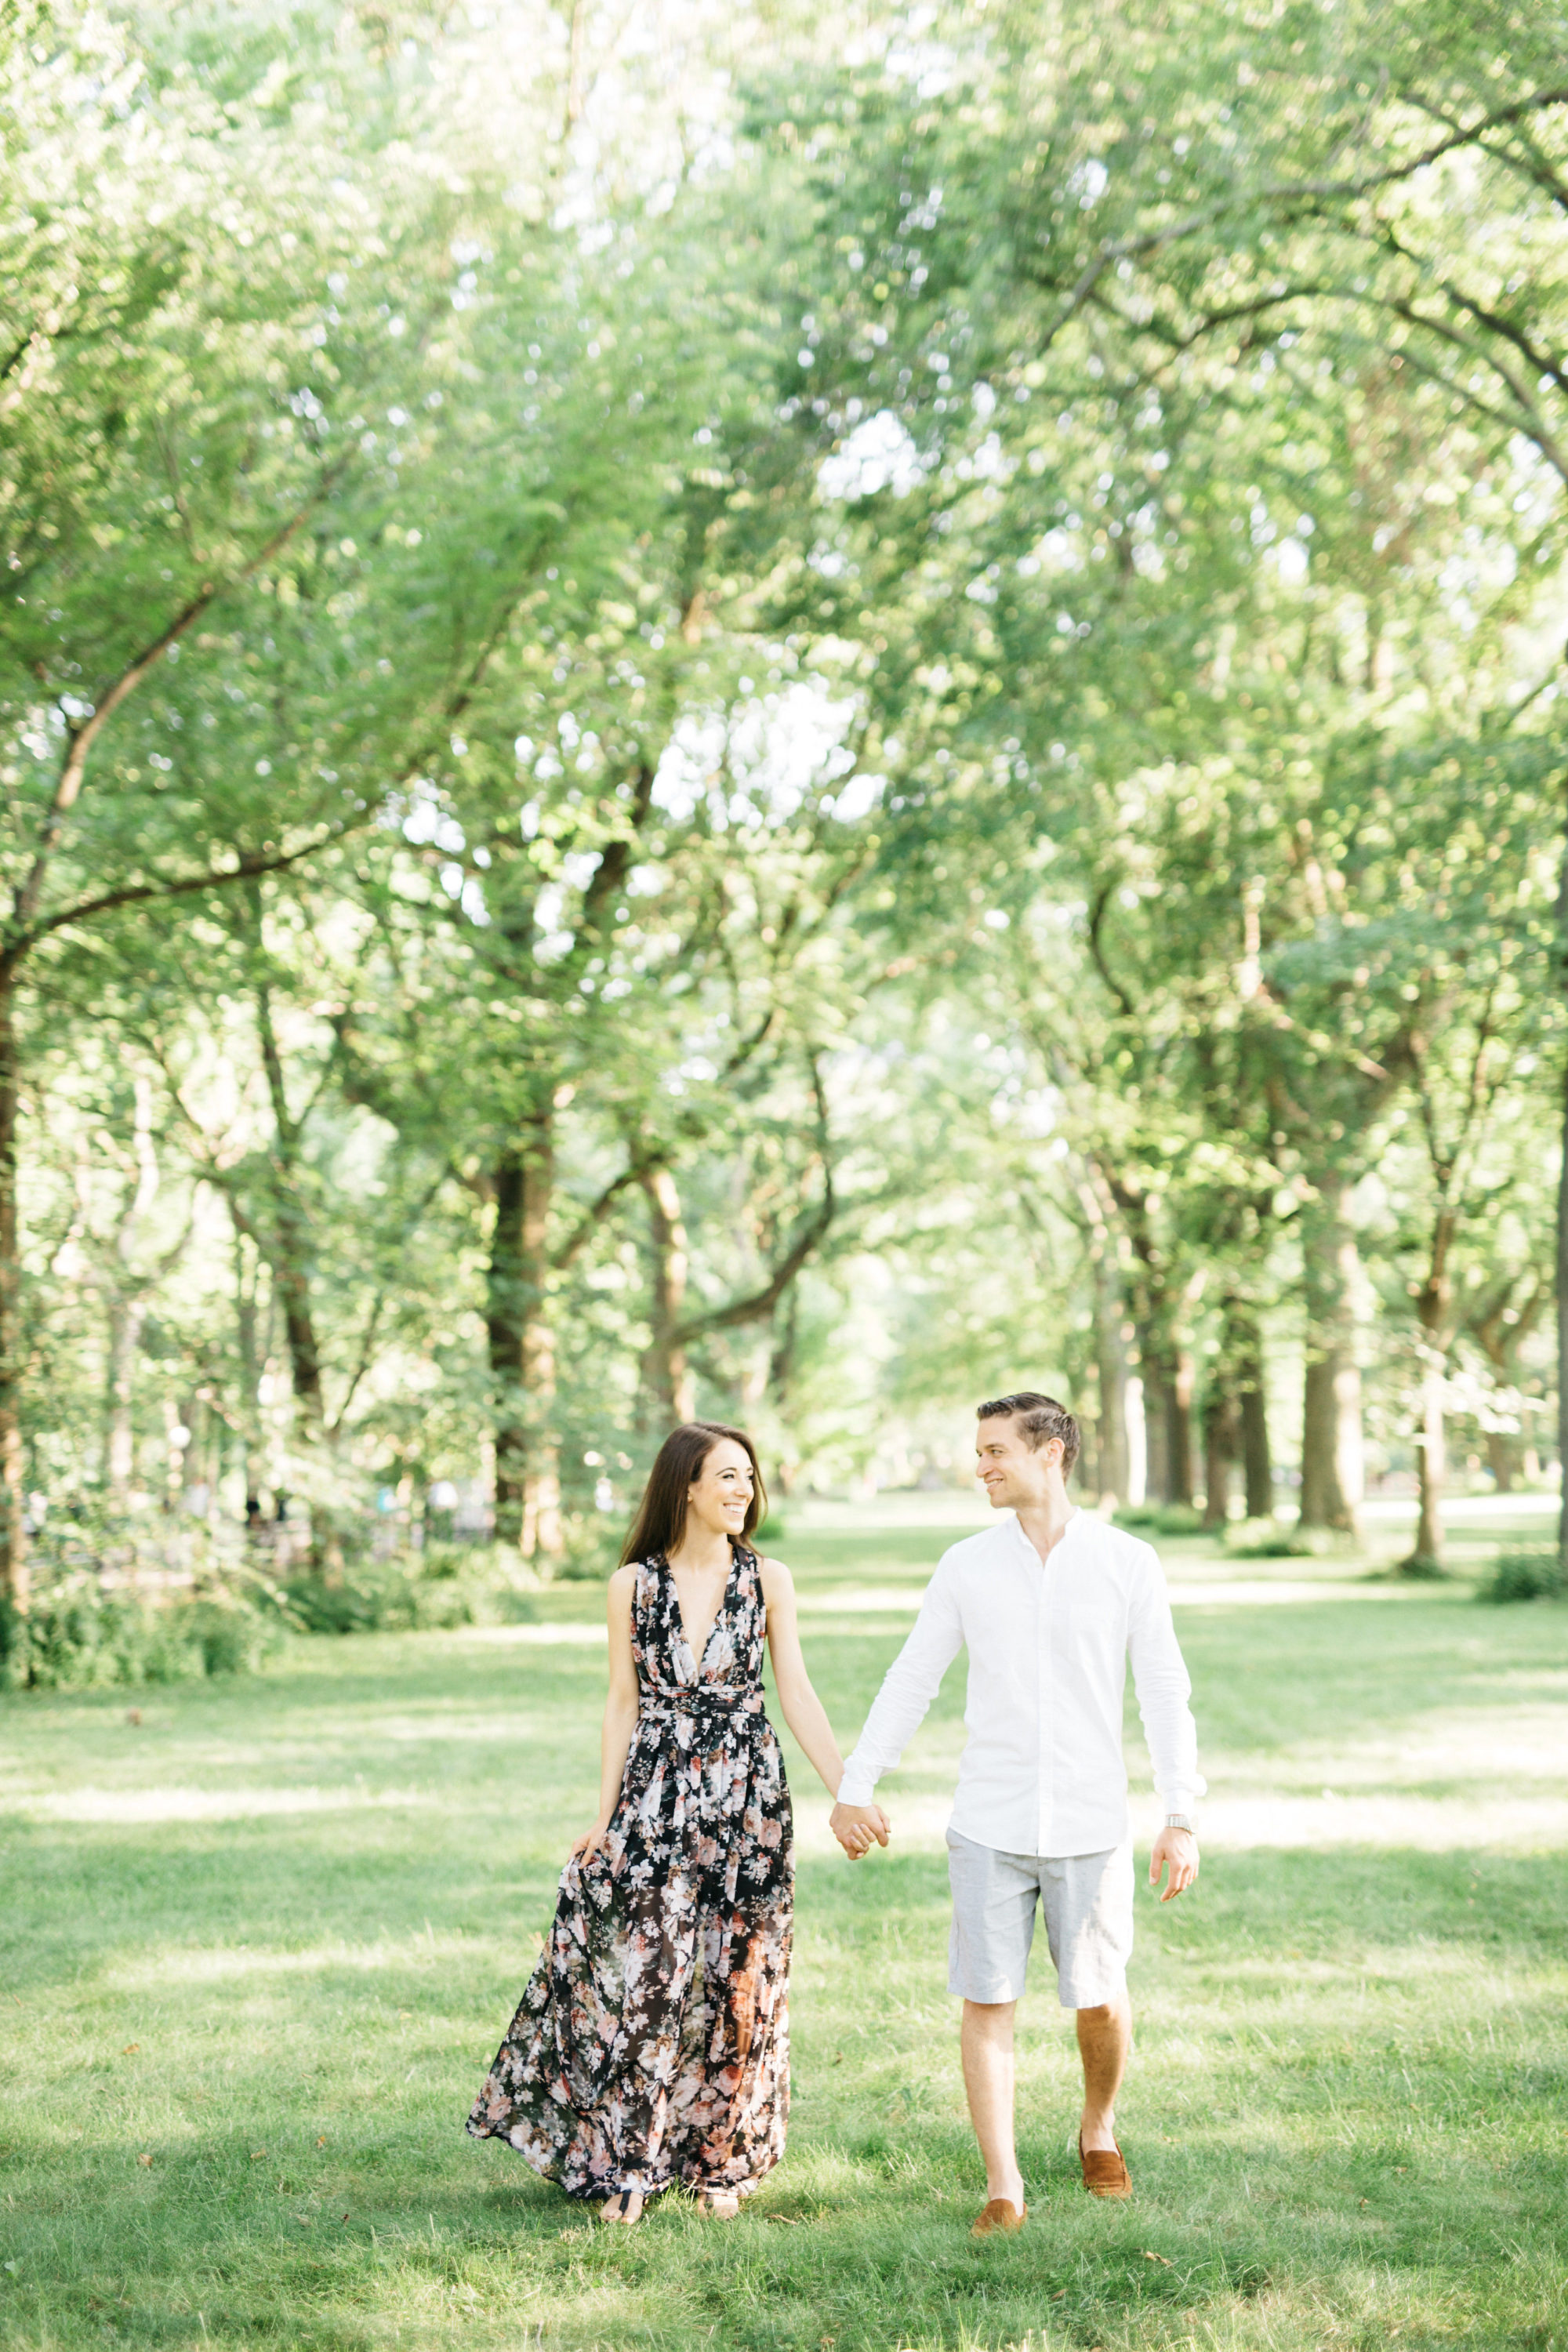 Couple walking in central park